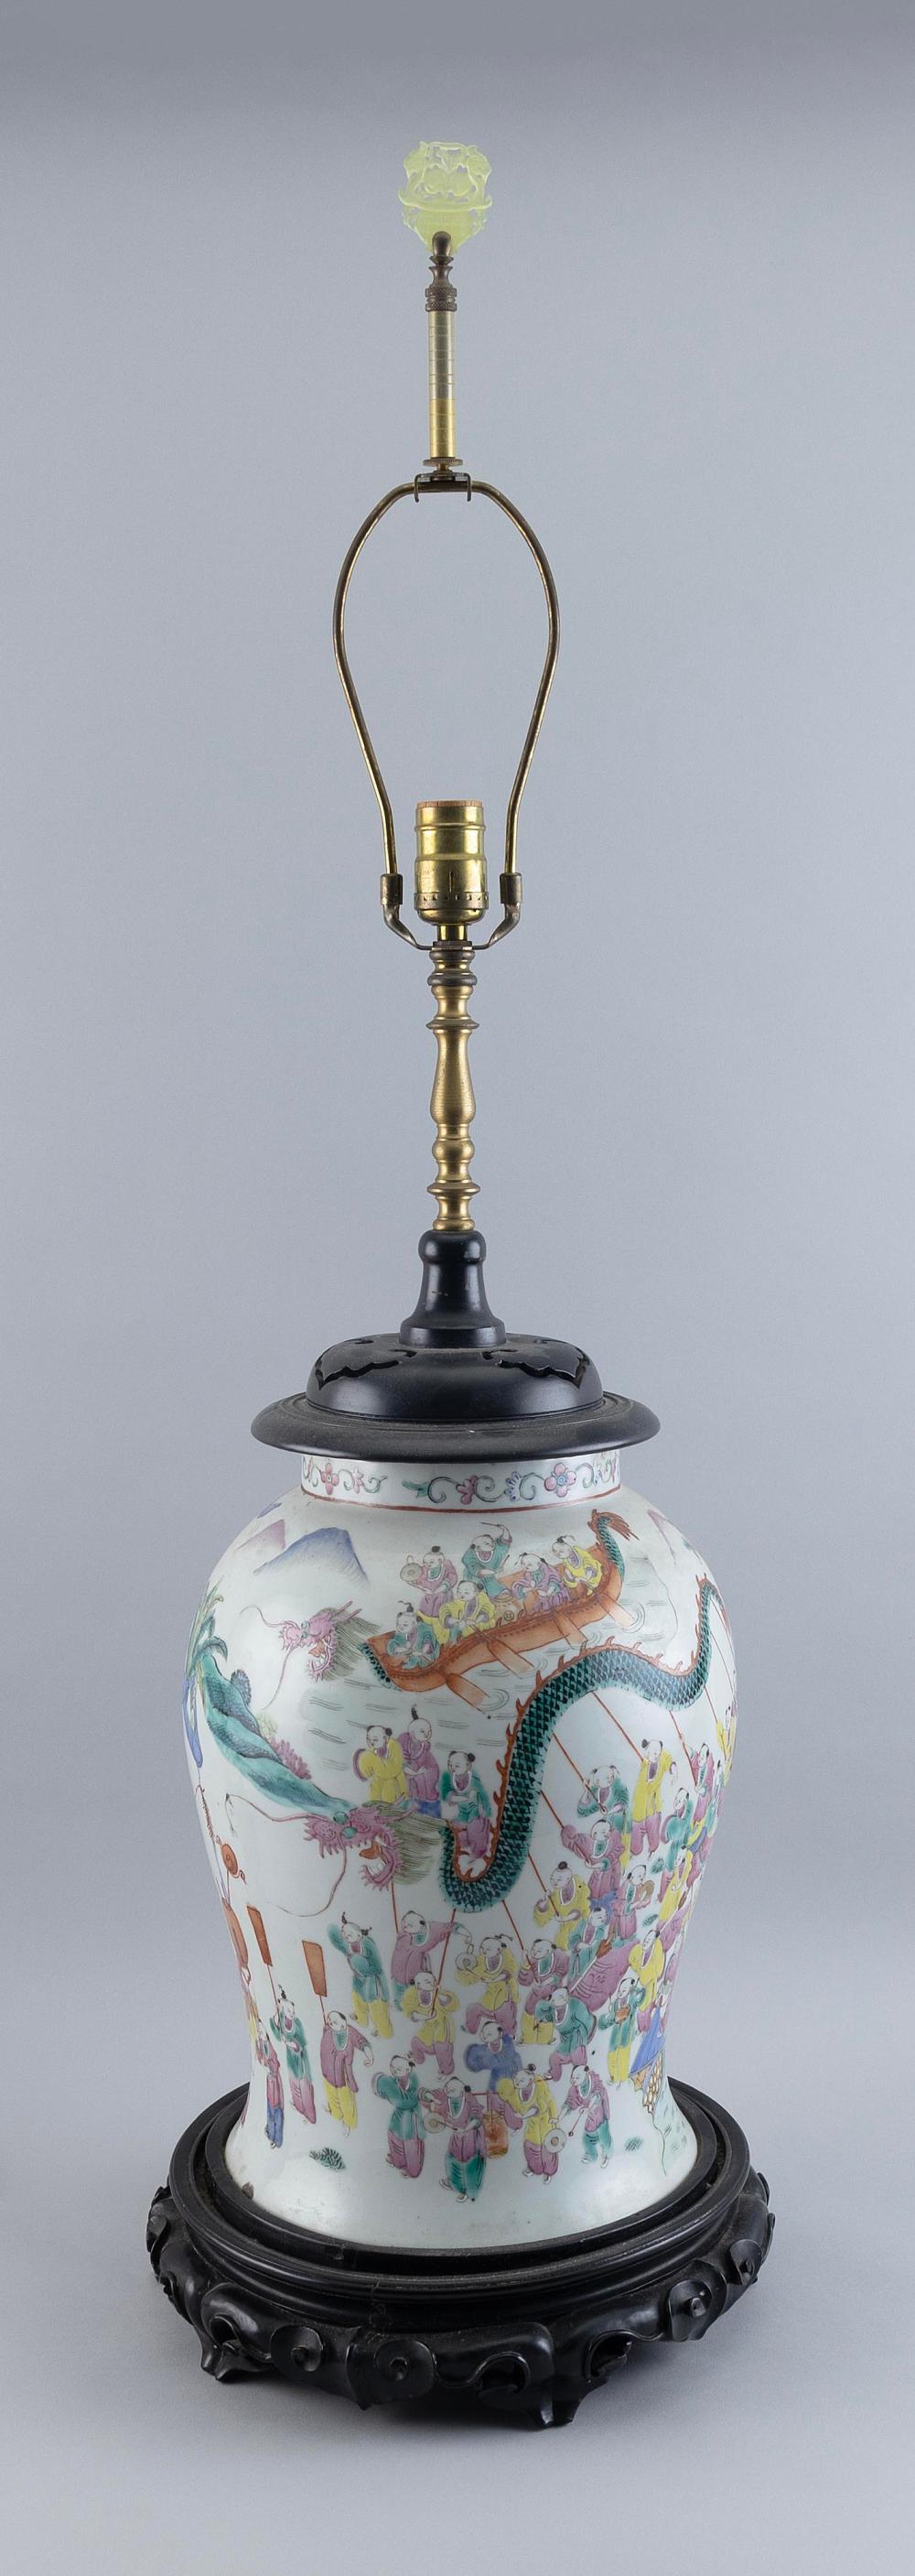 CHINESE EXPORT POLYCHROME PORCELAIN